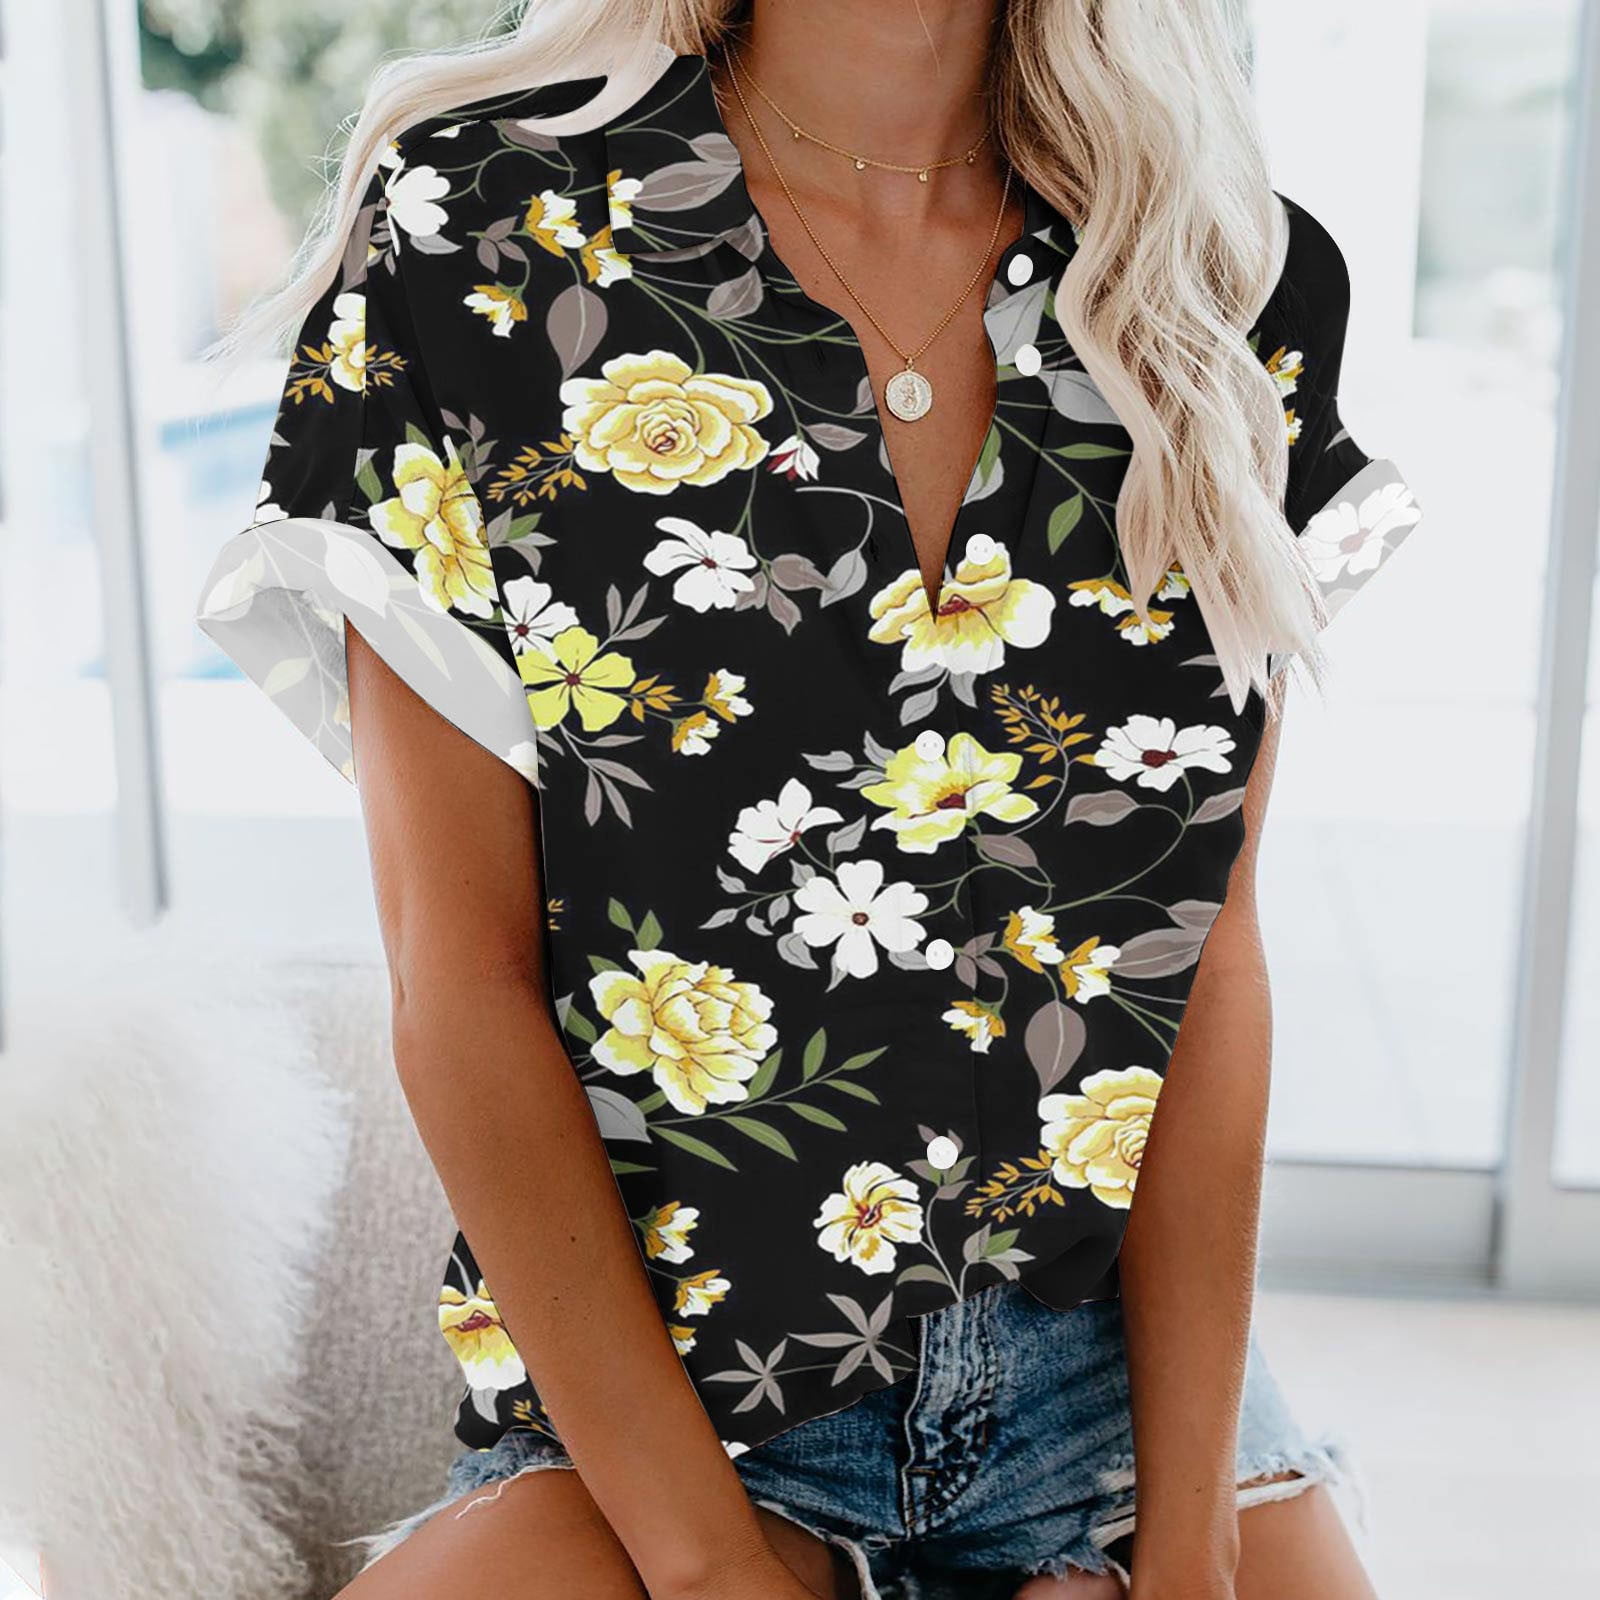 Wycnly Womens Tops Sunflower Print Short Sleeve V-Neck Tee Shirts Summer  Lightweight Plus Size Lapel Button Cardigan Blouses Yellow M Clearance  Clothes 